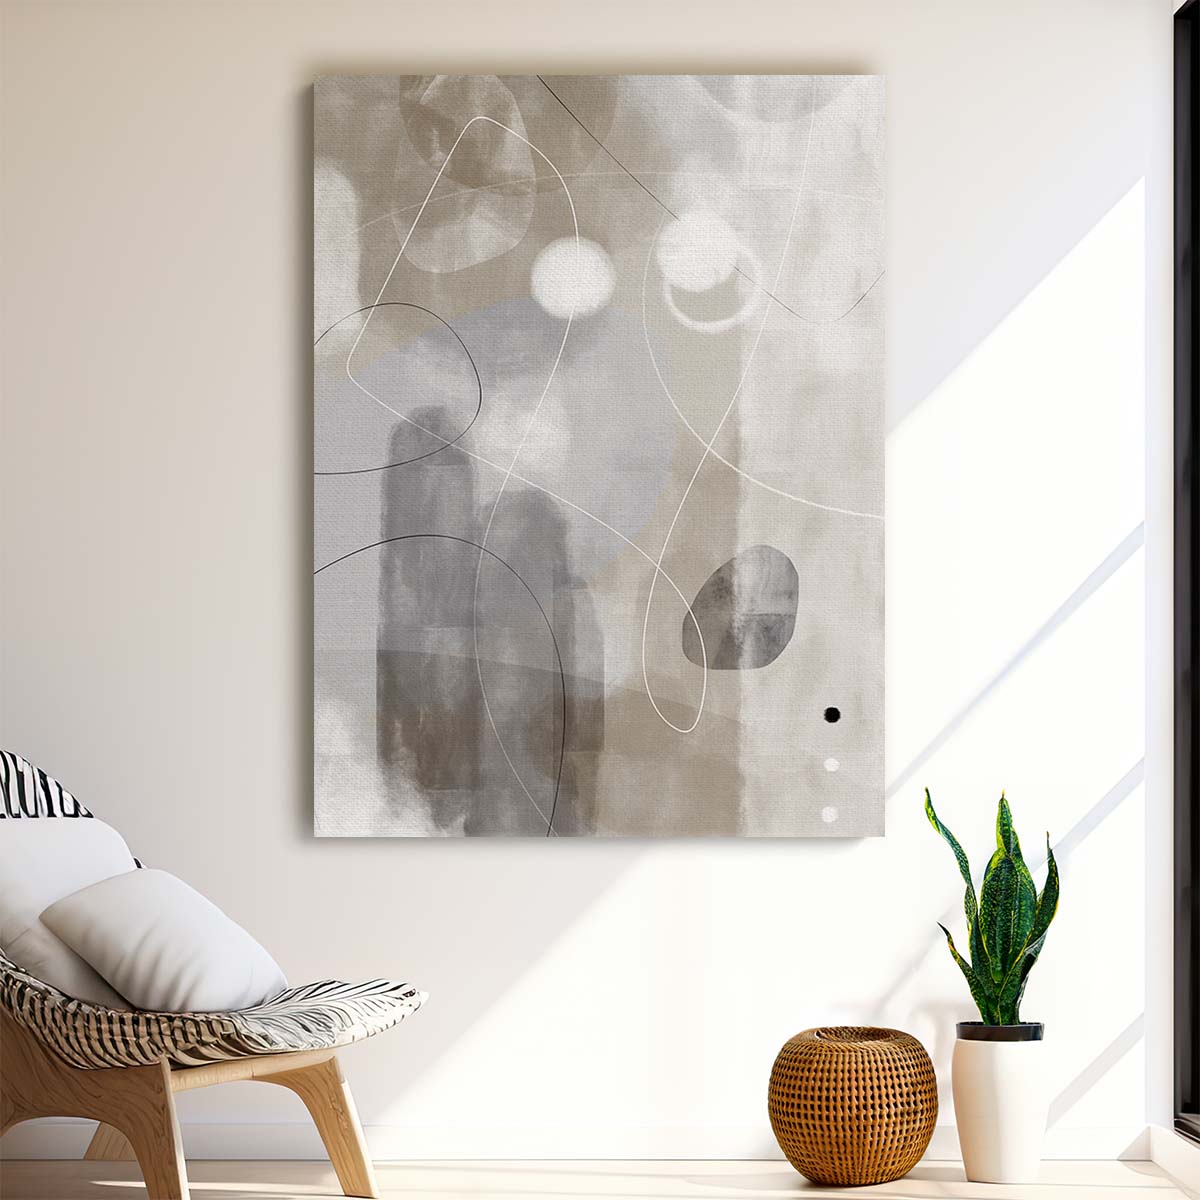 Abstract Geometric Illustration with Painted Lines & Shapes Wall Art by Luxuriance Designs, made in USA